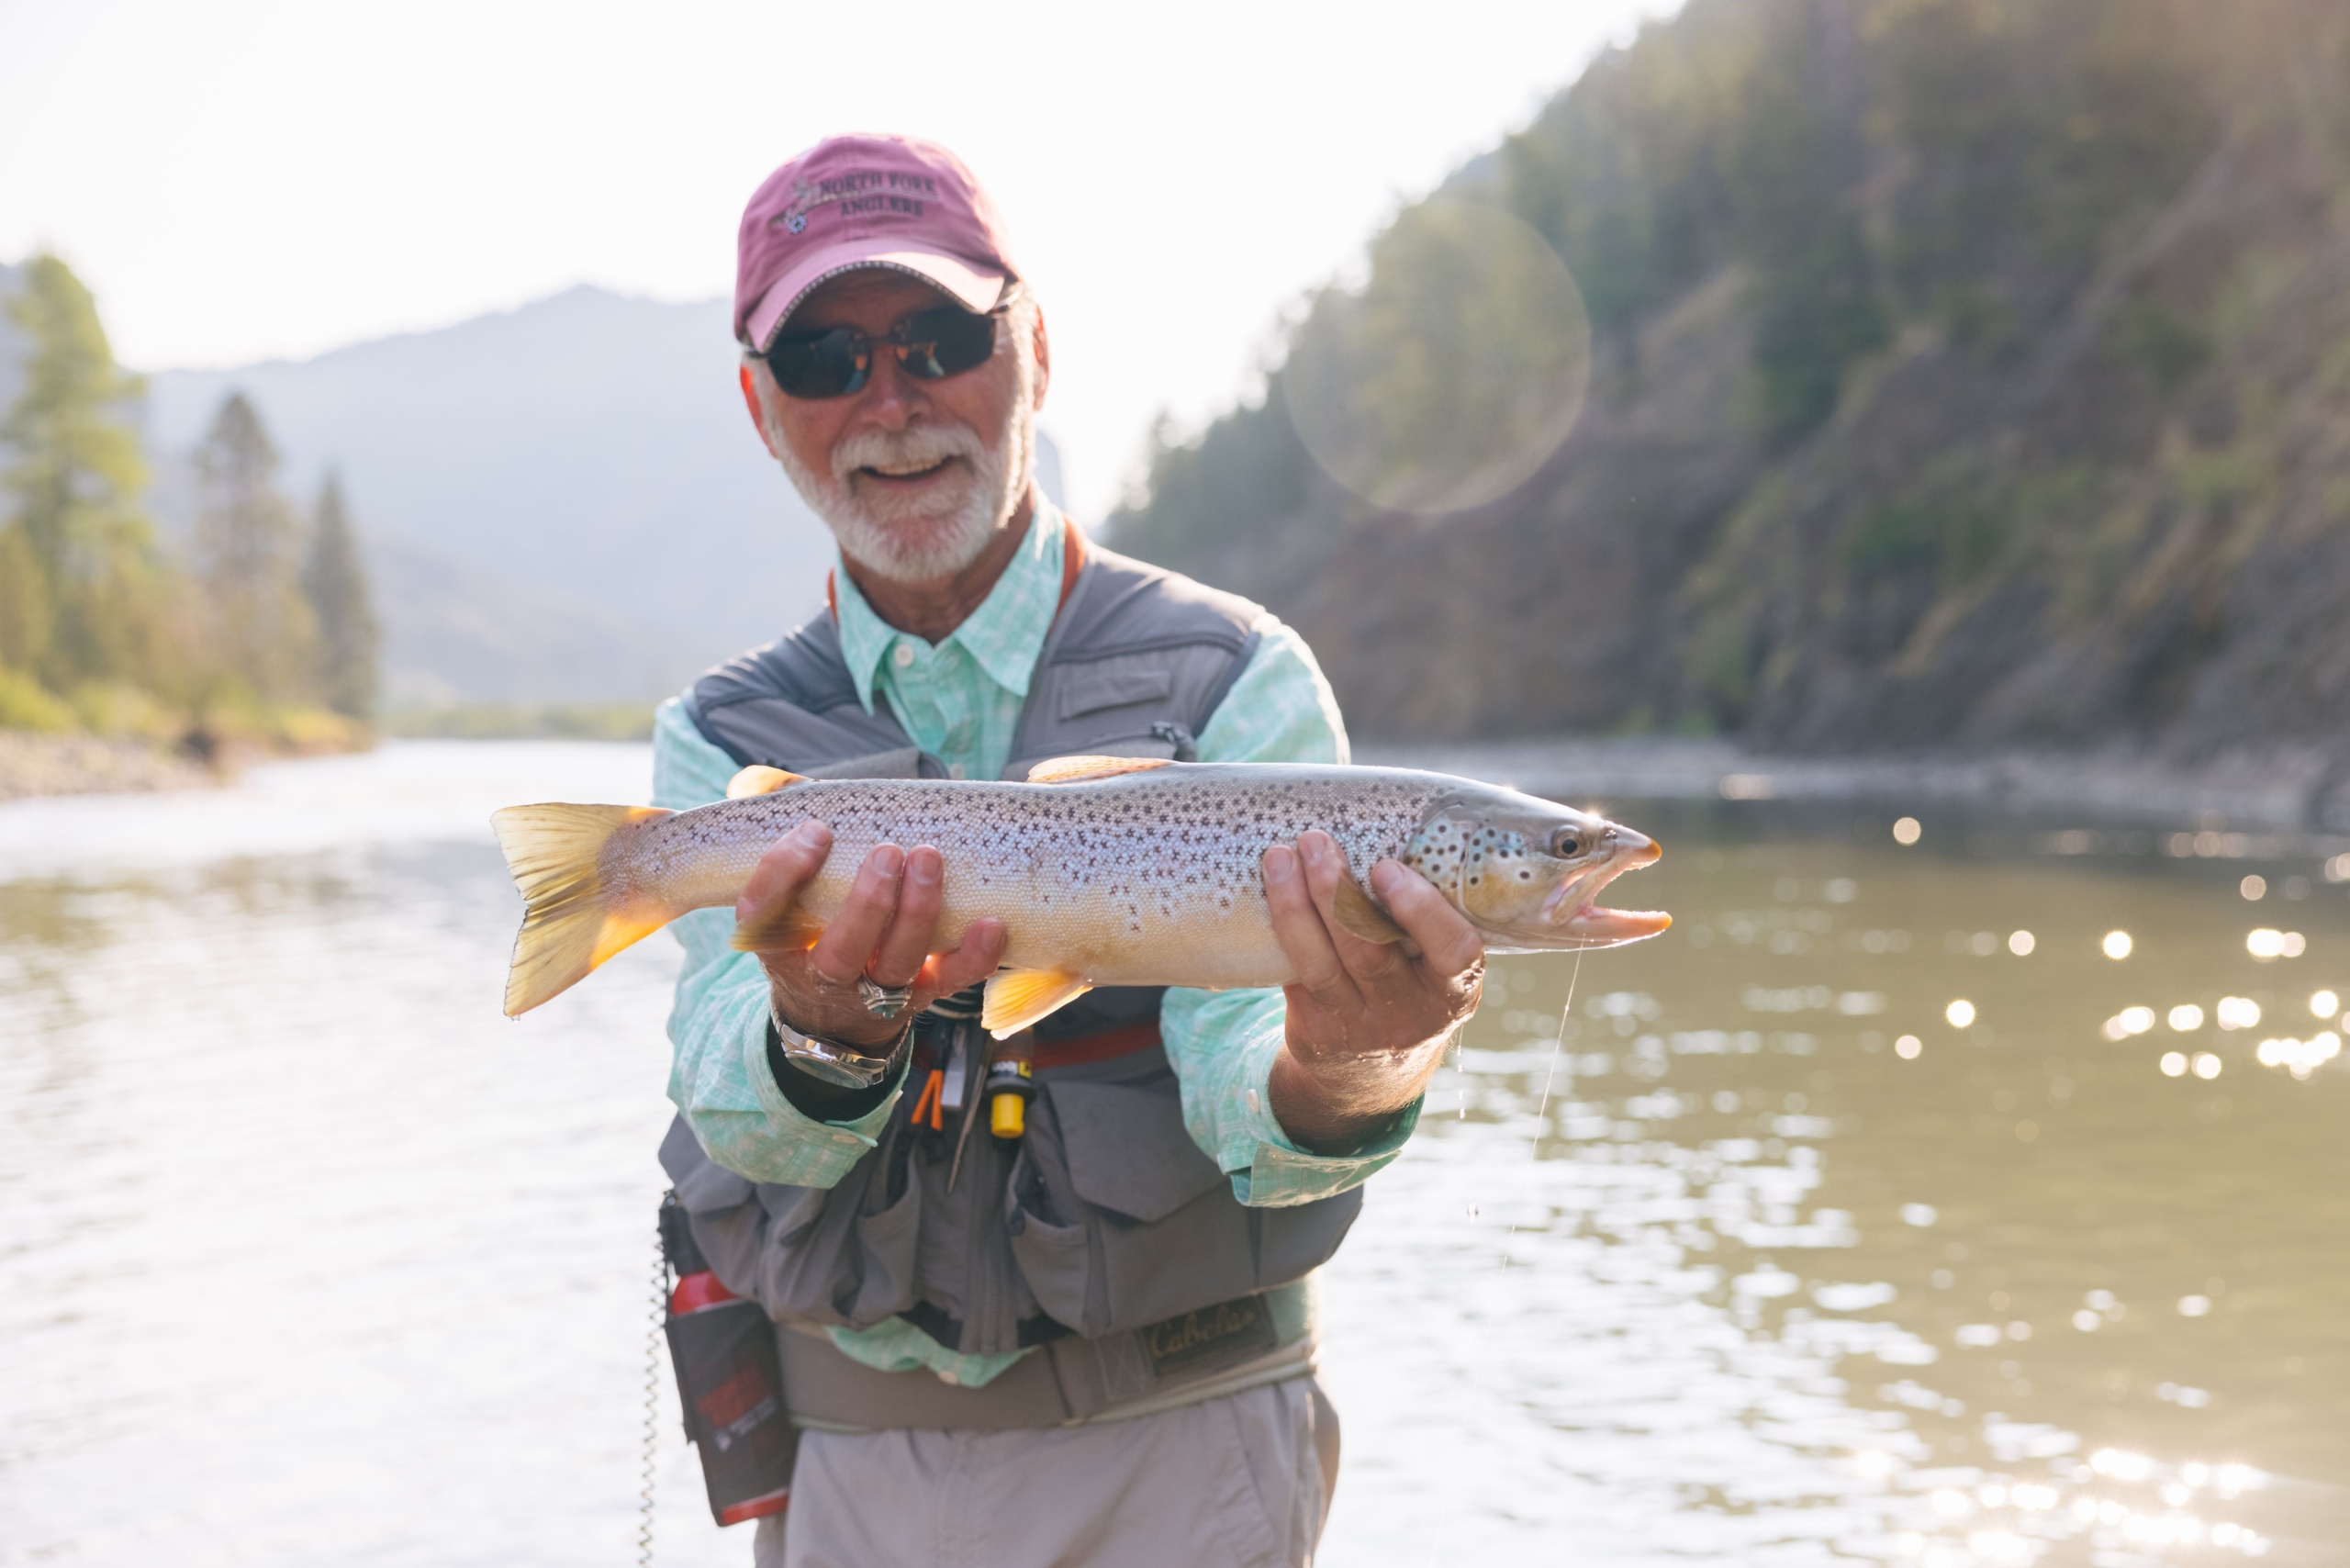 INCREDIBLE Fly Fishing on one of the BEST Trout Rivers in the World 